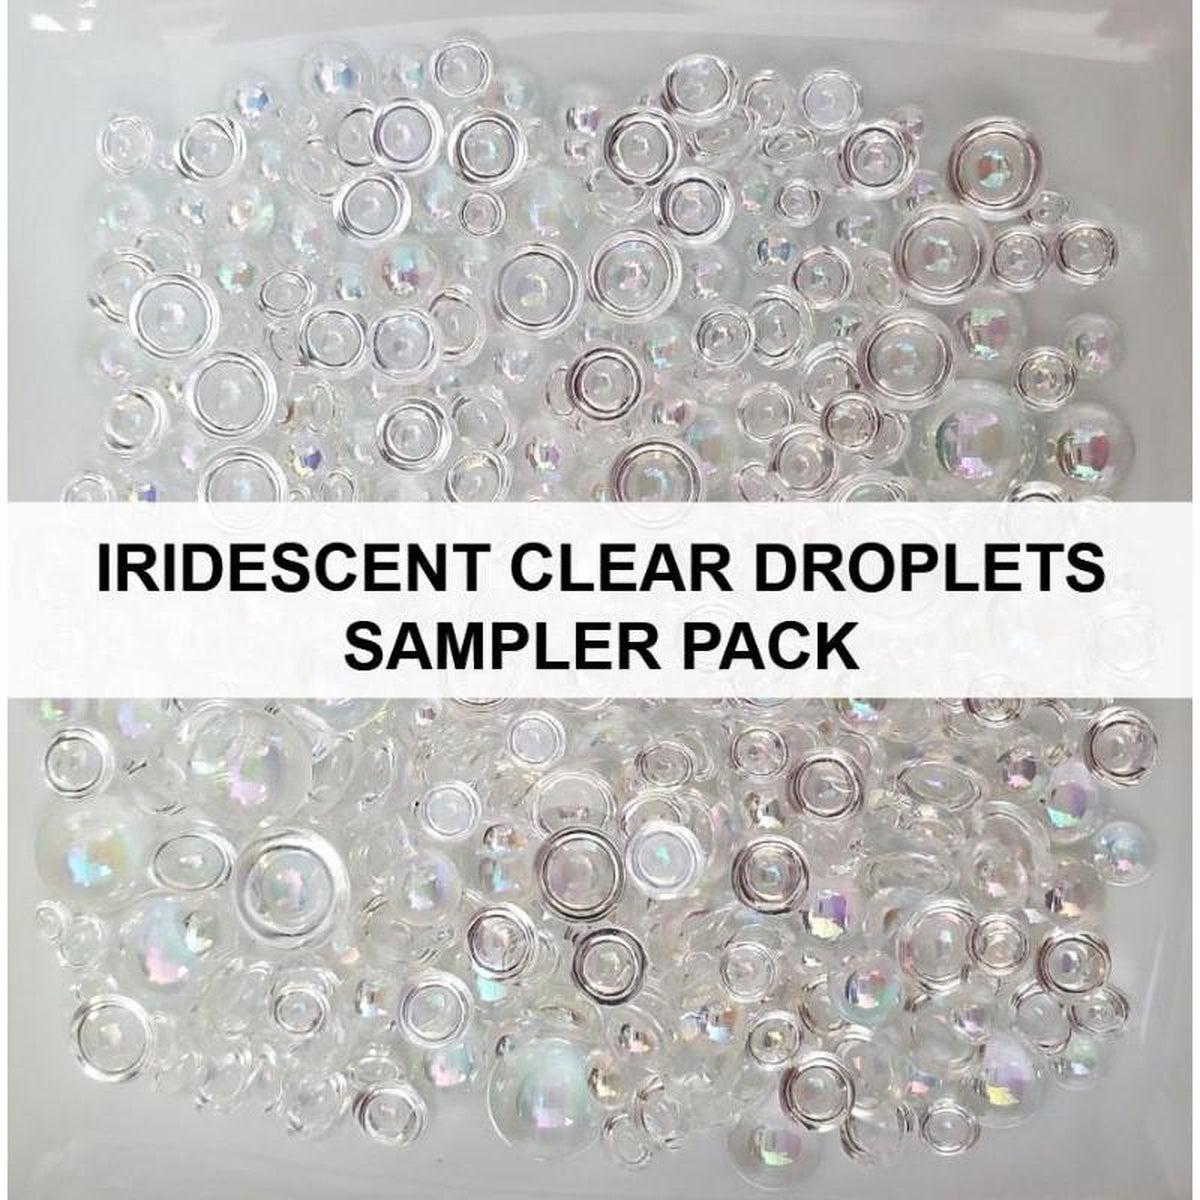 Iridescent Clear AB Droplets Sampler Pack Kat Scrappiness